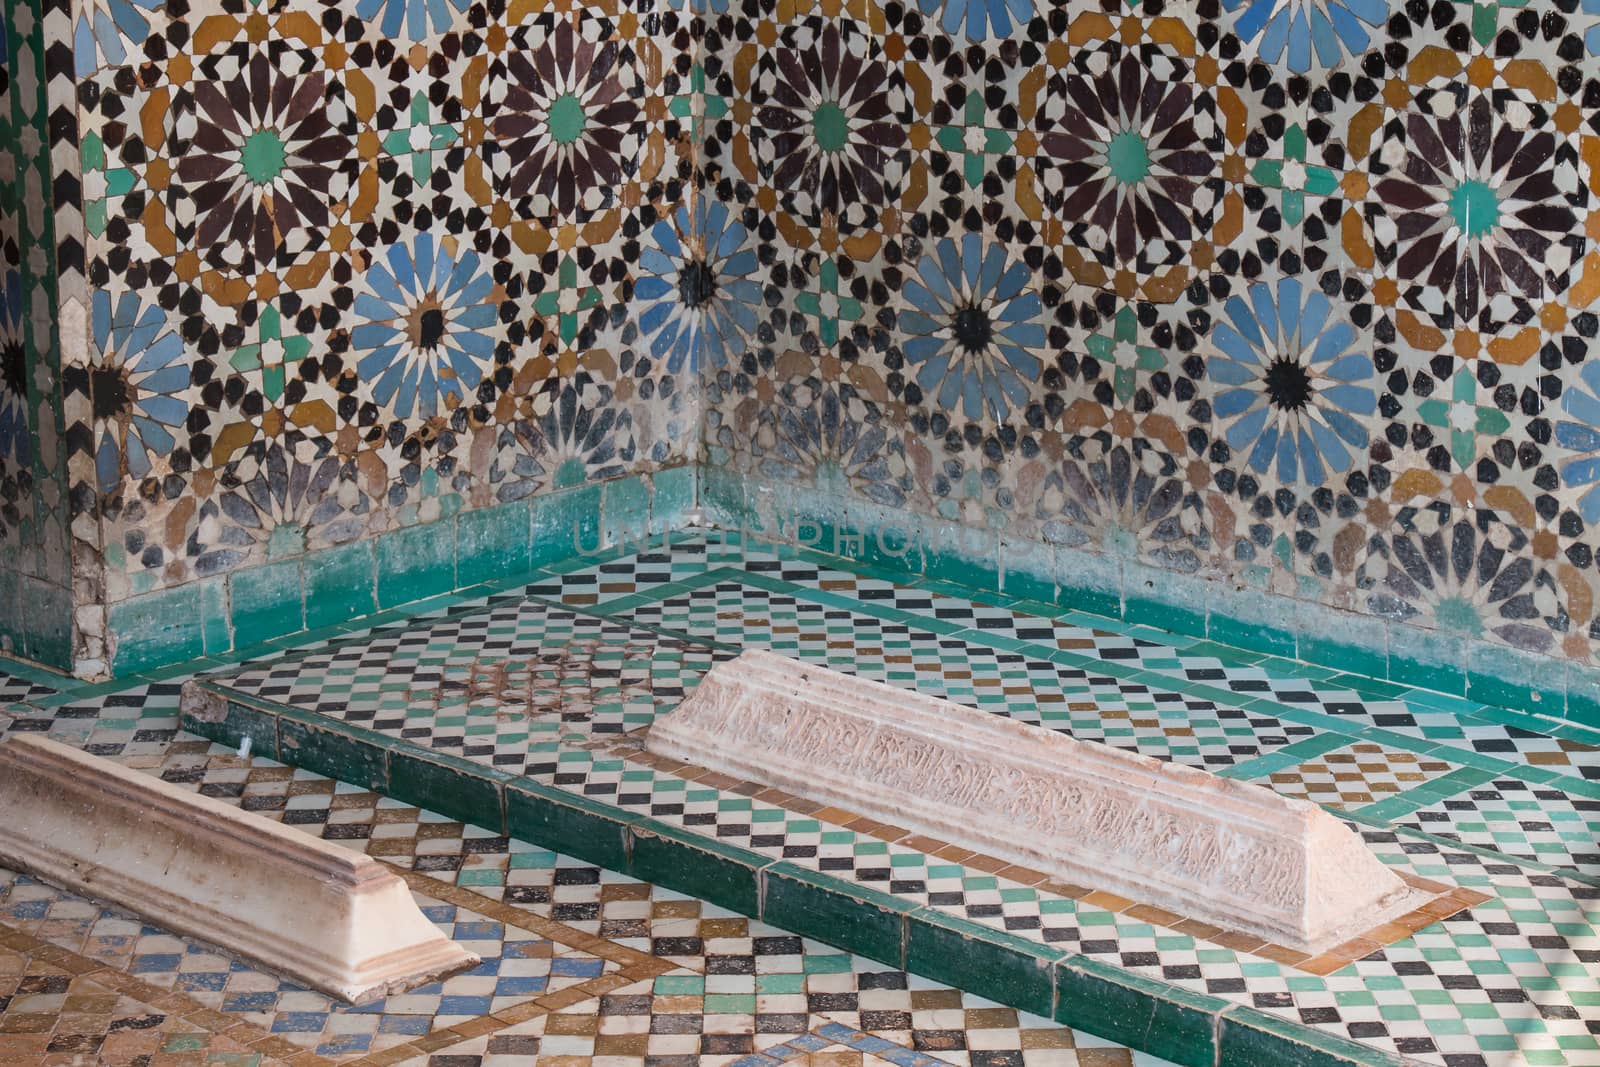 The tombs are, because of the beauty of their decoration, a major attraction for visitors of Marrakesh.